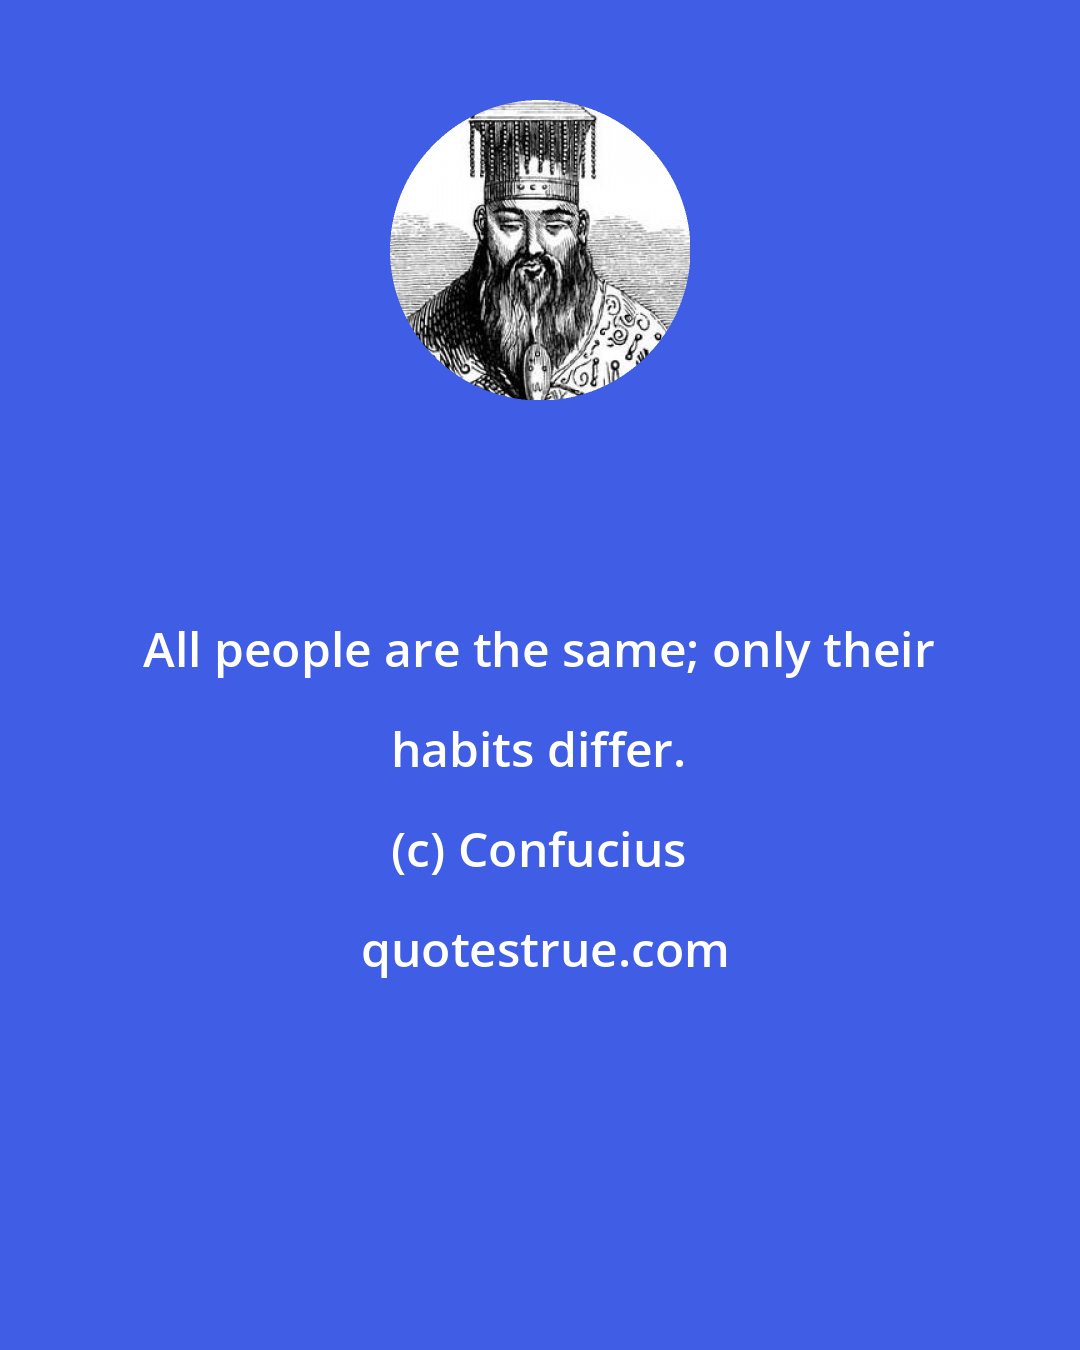 Confucius: All people are the same; only their habits differ.